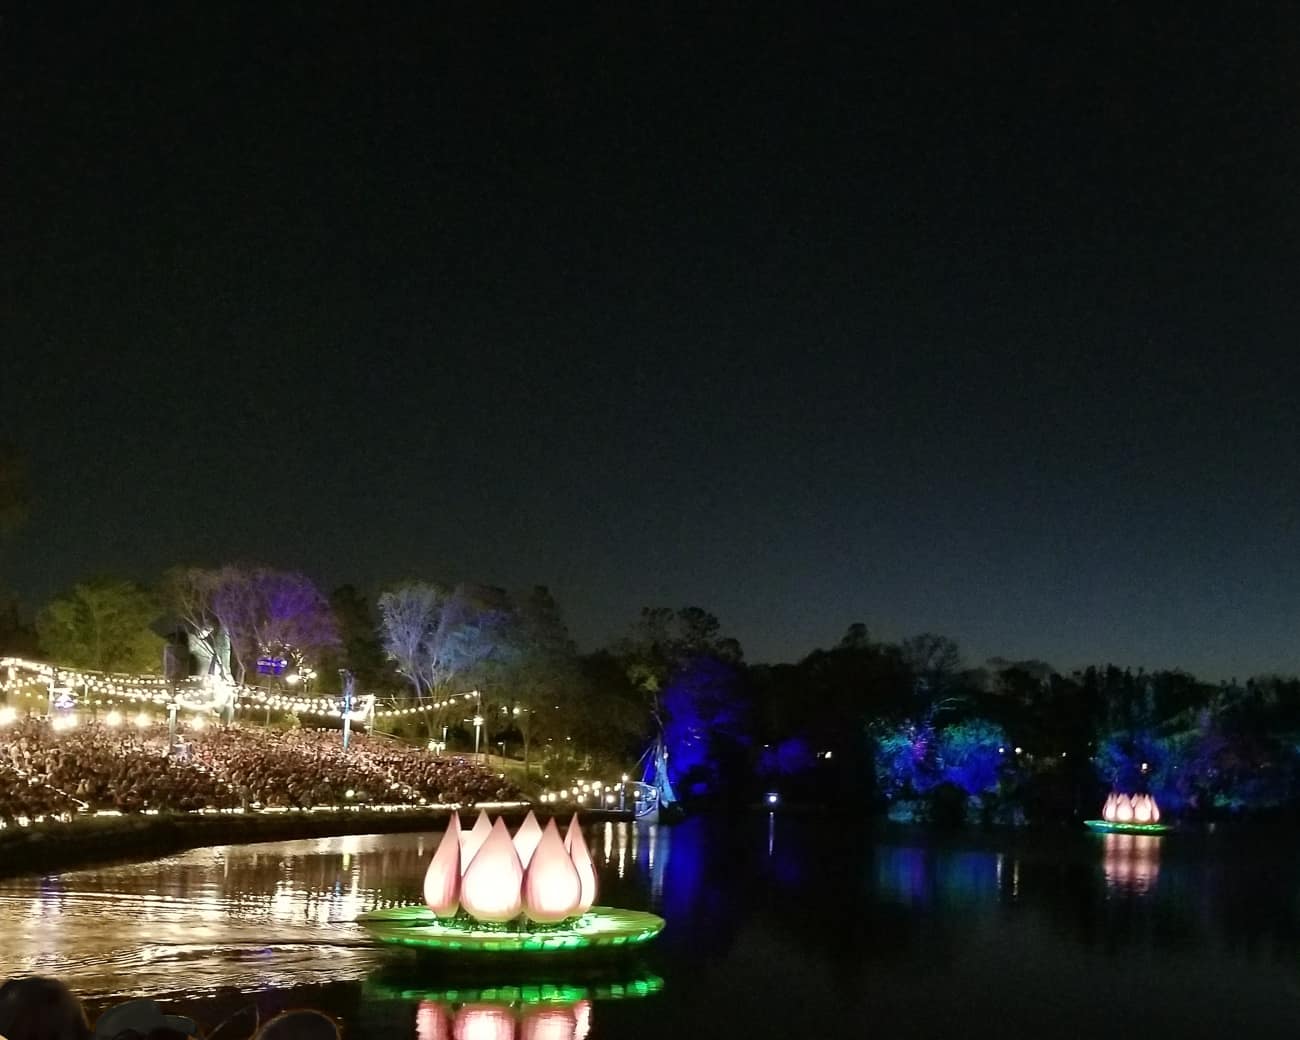 How to take Better Disney World Pictures at Night